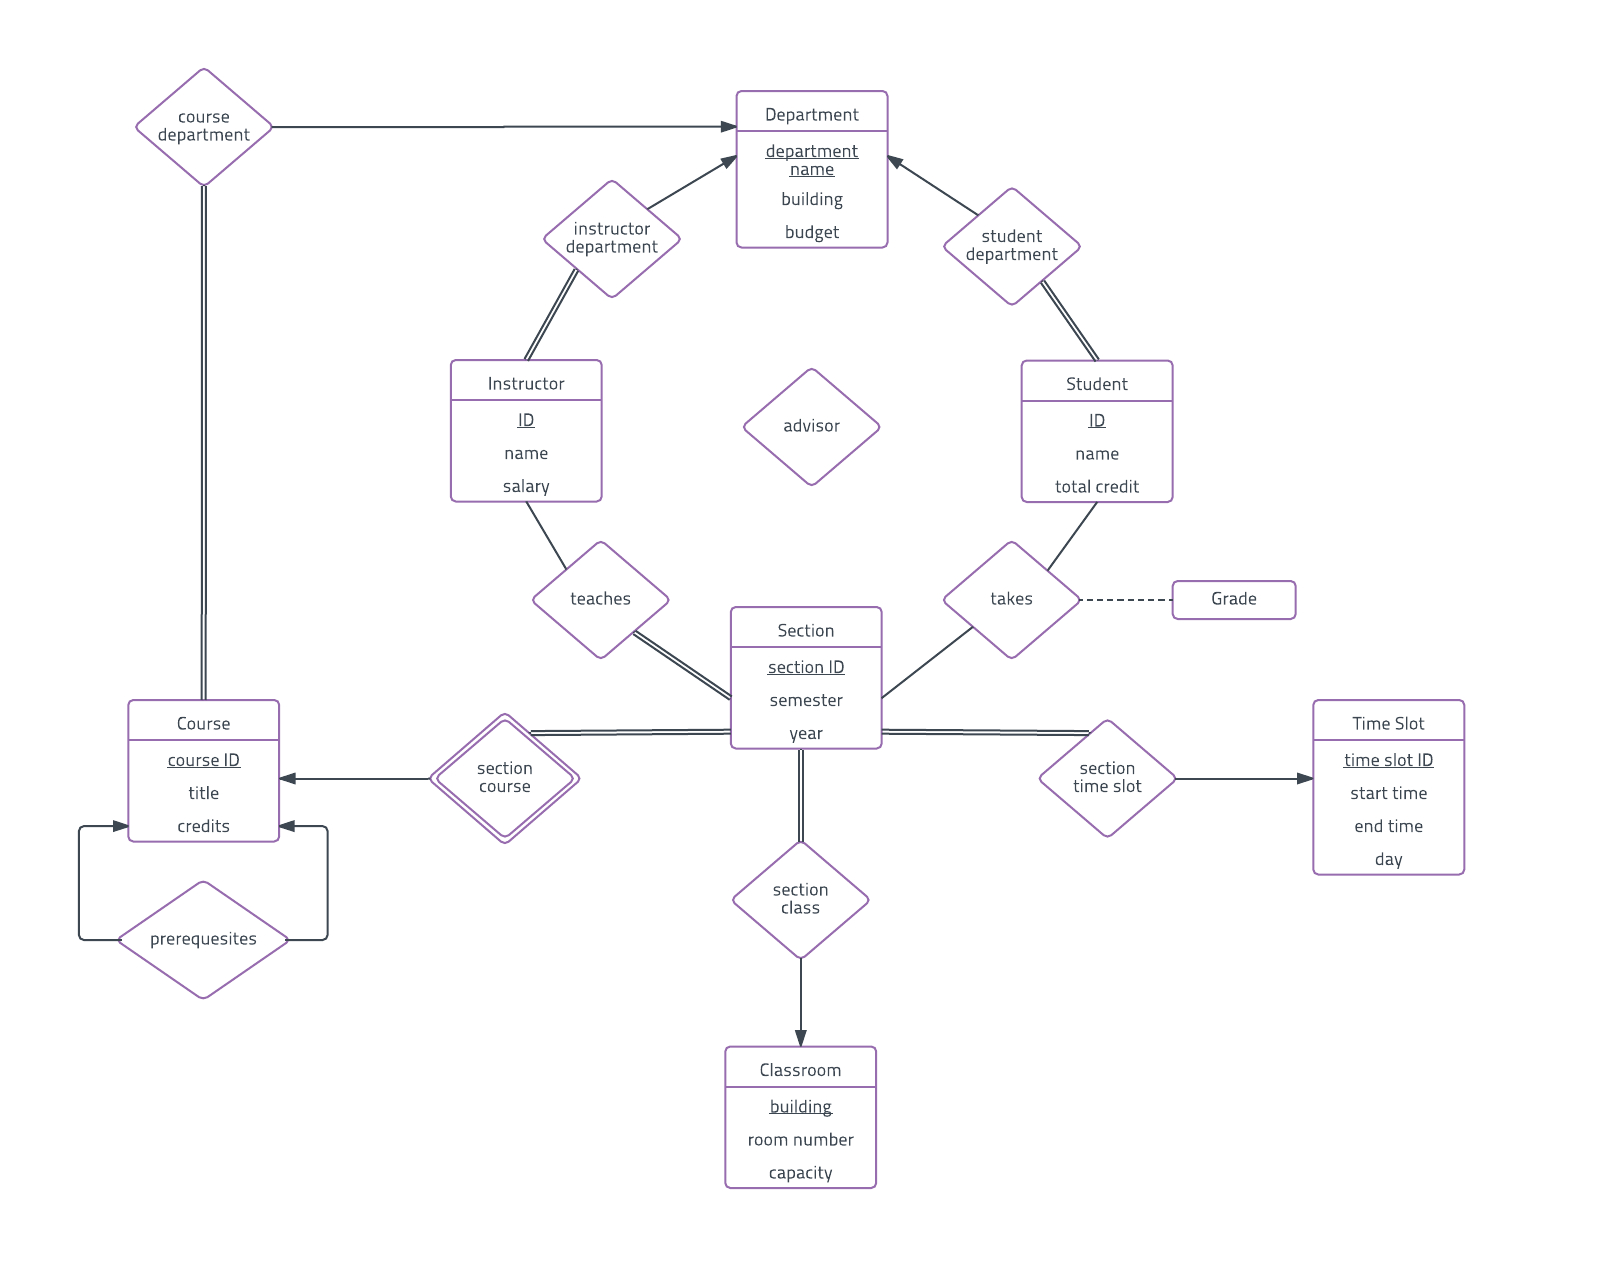 Er Diagram Examples And Templates | Lucidchart with regard to Er Diagram For Job Application